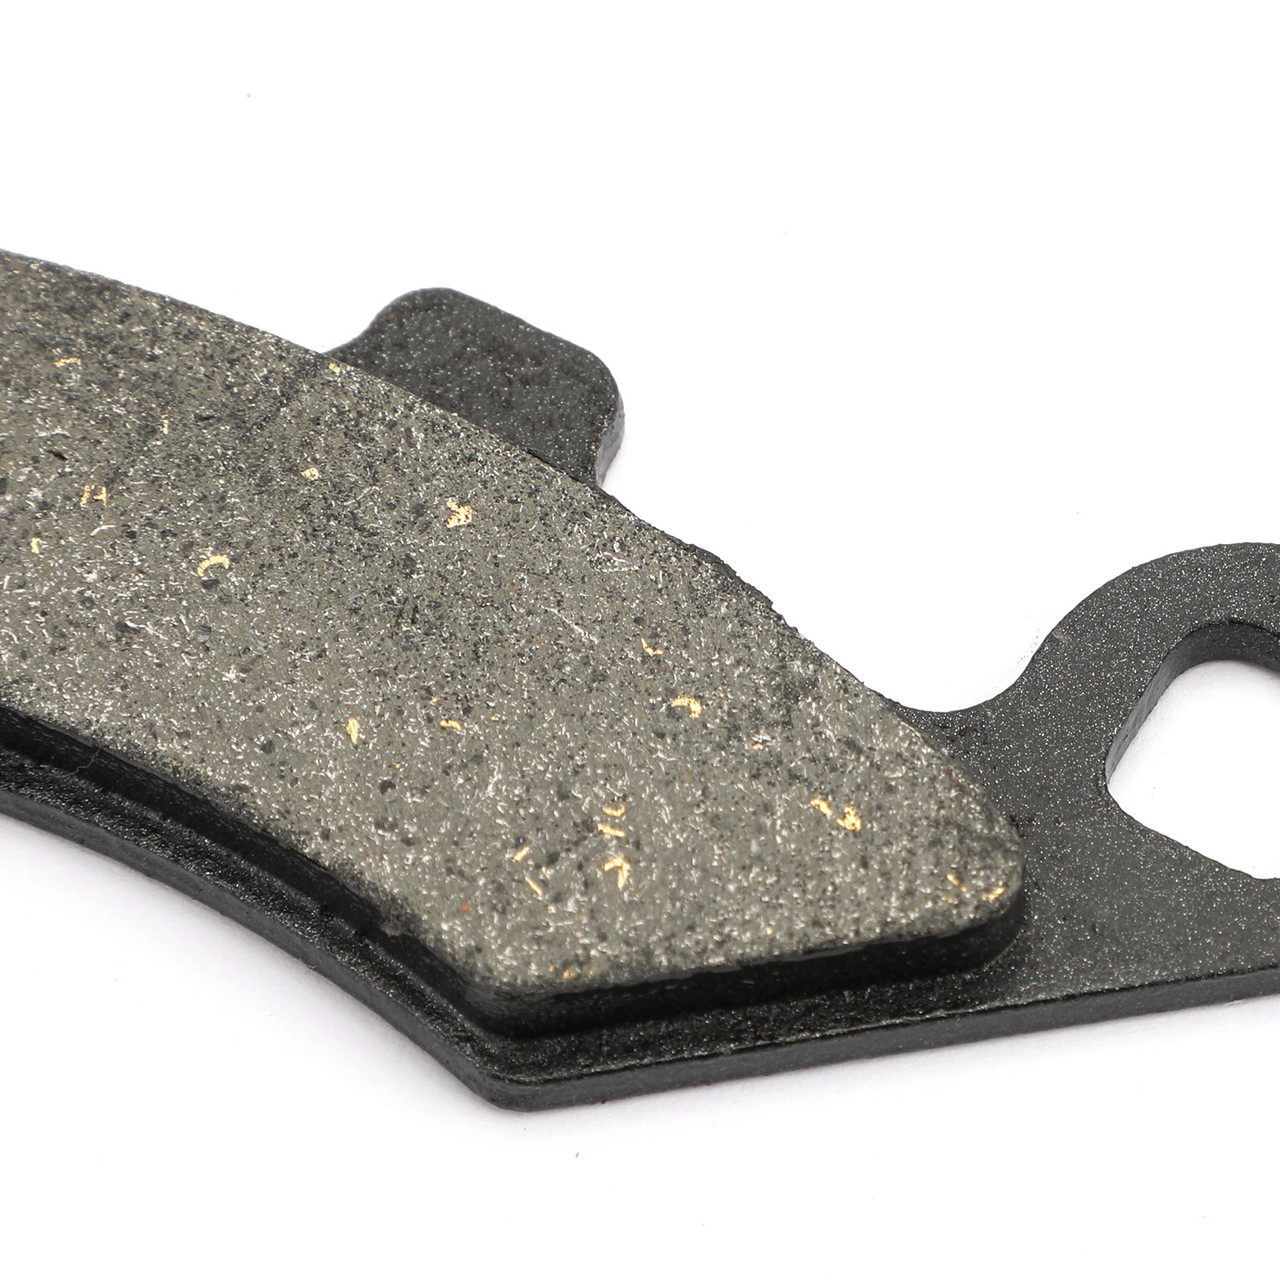 Front & Rear Brake Pads For For Polaris RZR 800 08-14 RZR 800 S 09-14 RZR 800 EPS 10-14 RZR 800 S EPS 13-14 RZR 570 12-15 RZR 570 EPS 13-15